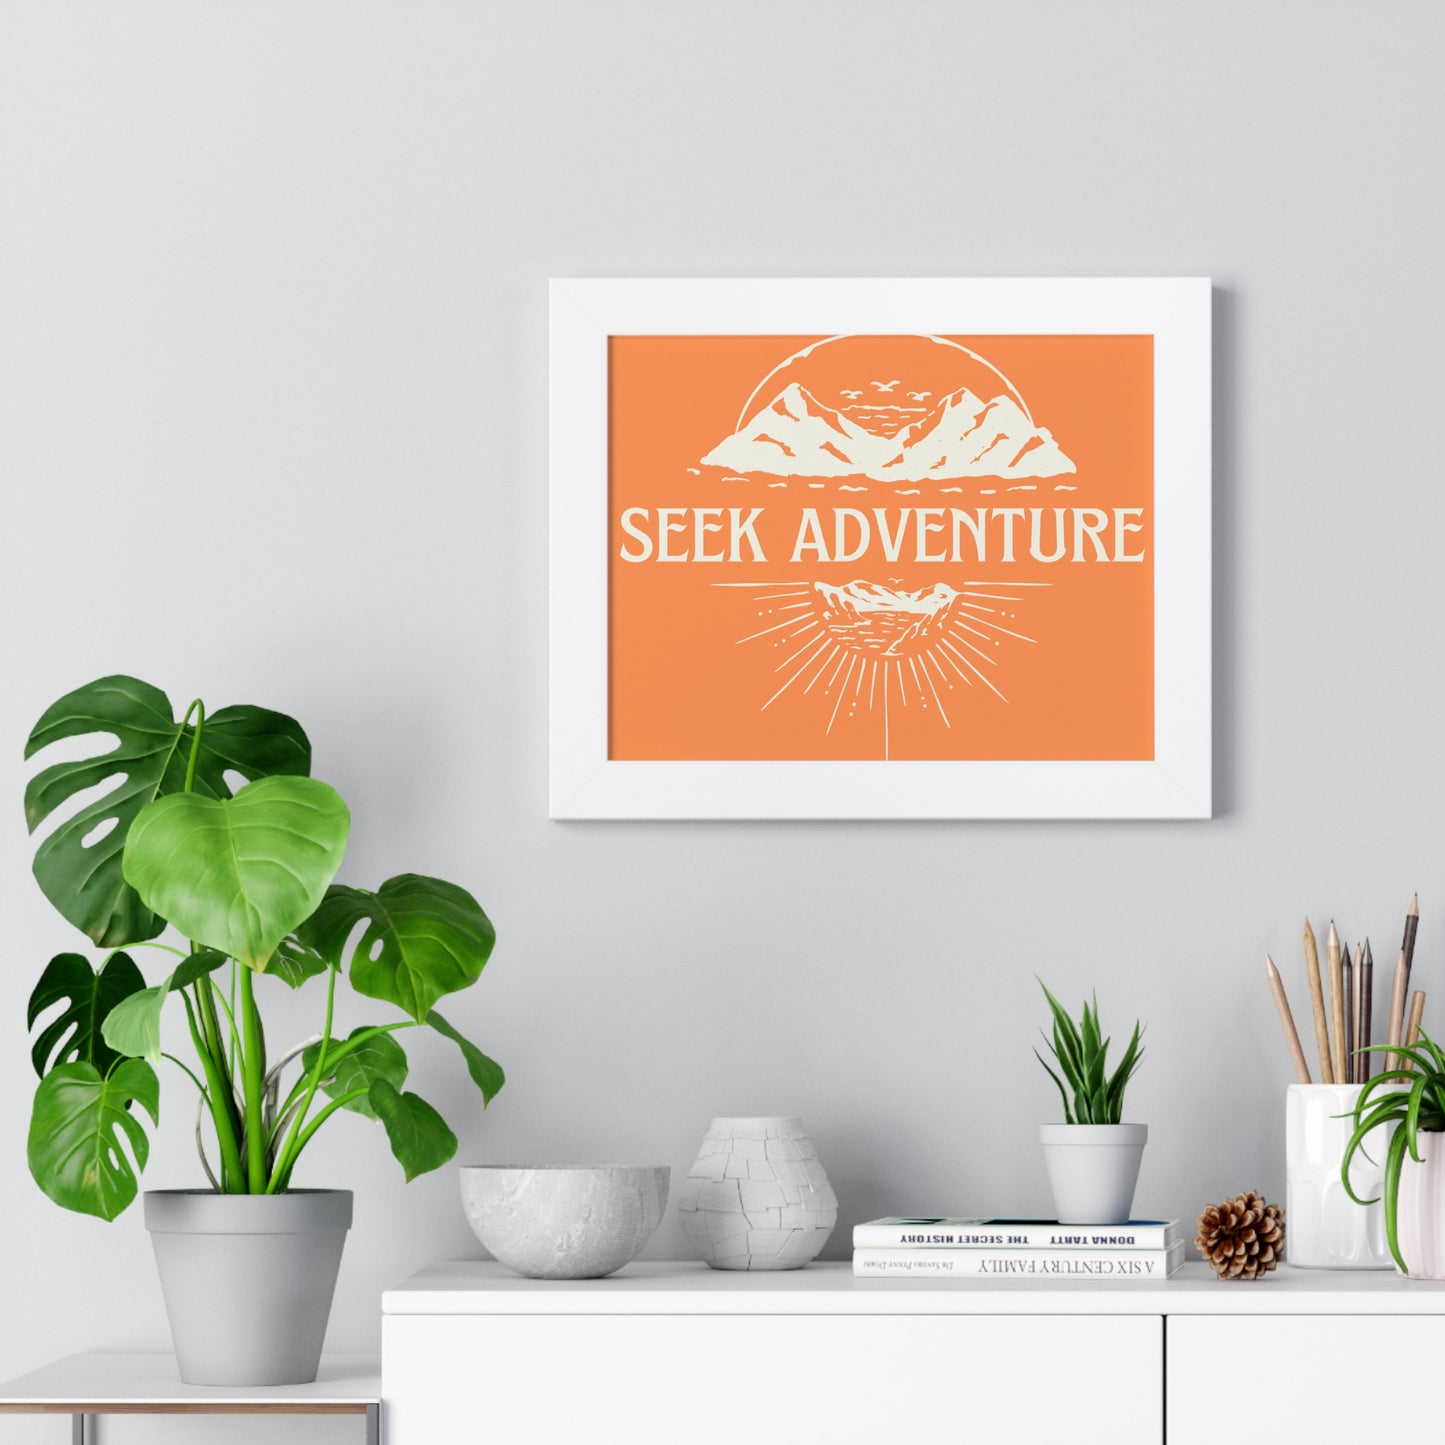 Seek Adventure Poster - Exclusively Crafted for the Wanderer in You!